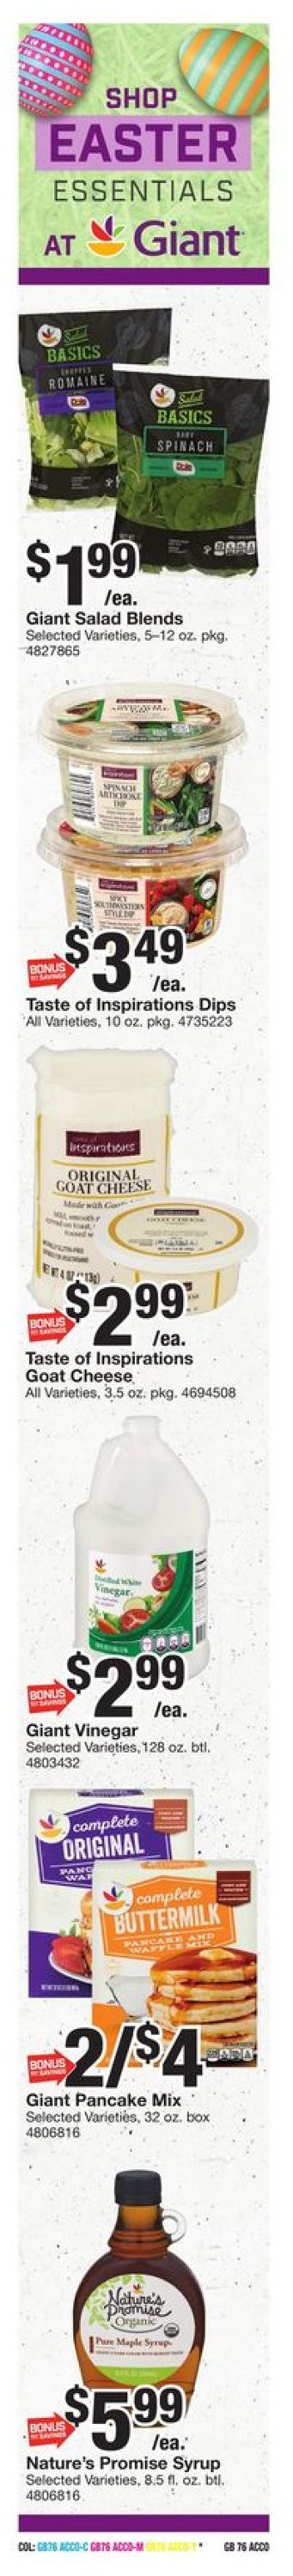 Giant Food - Easter 2021 Ad Weekly Ad Circular - valid 03/26-04/01/2021 (Page 12)